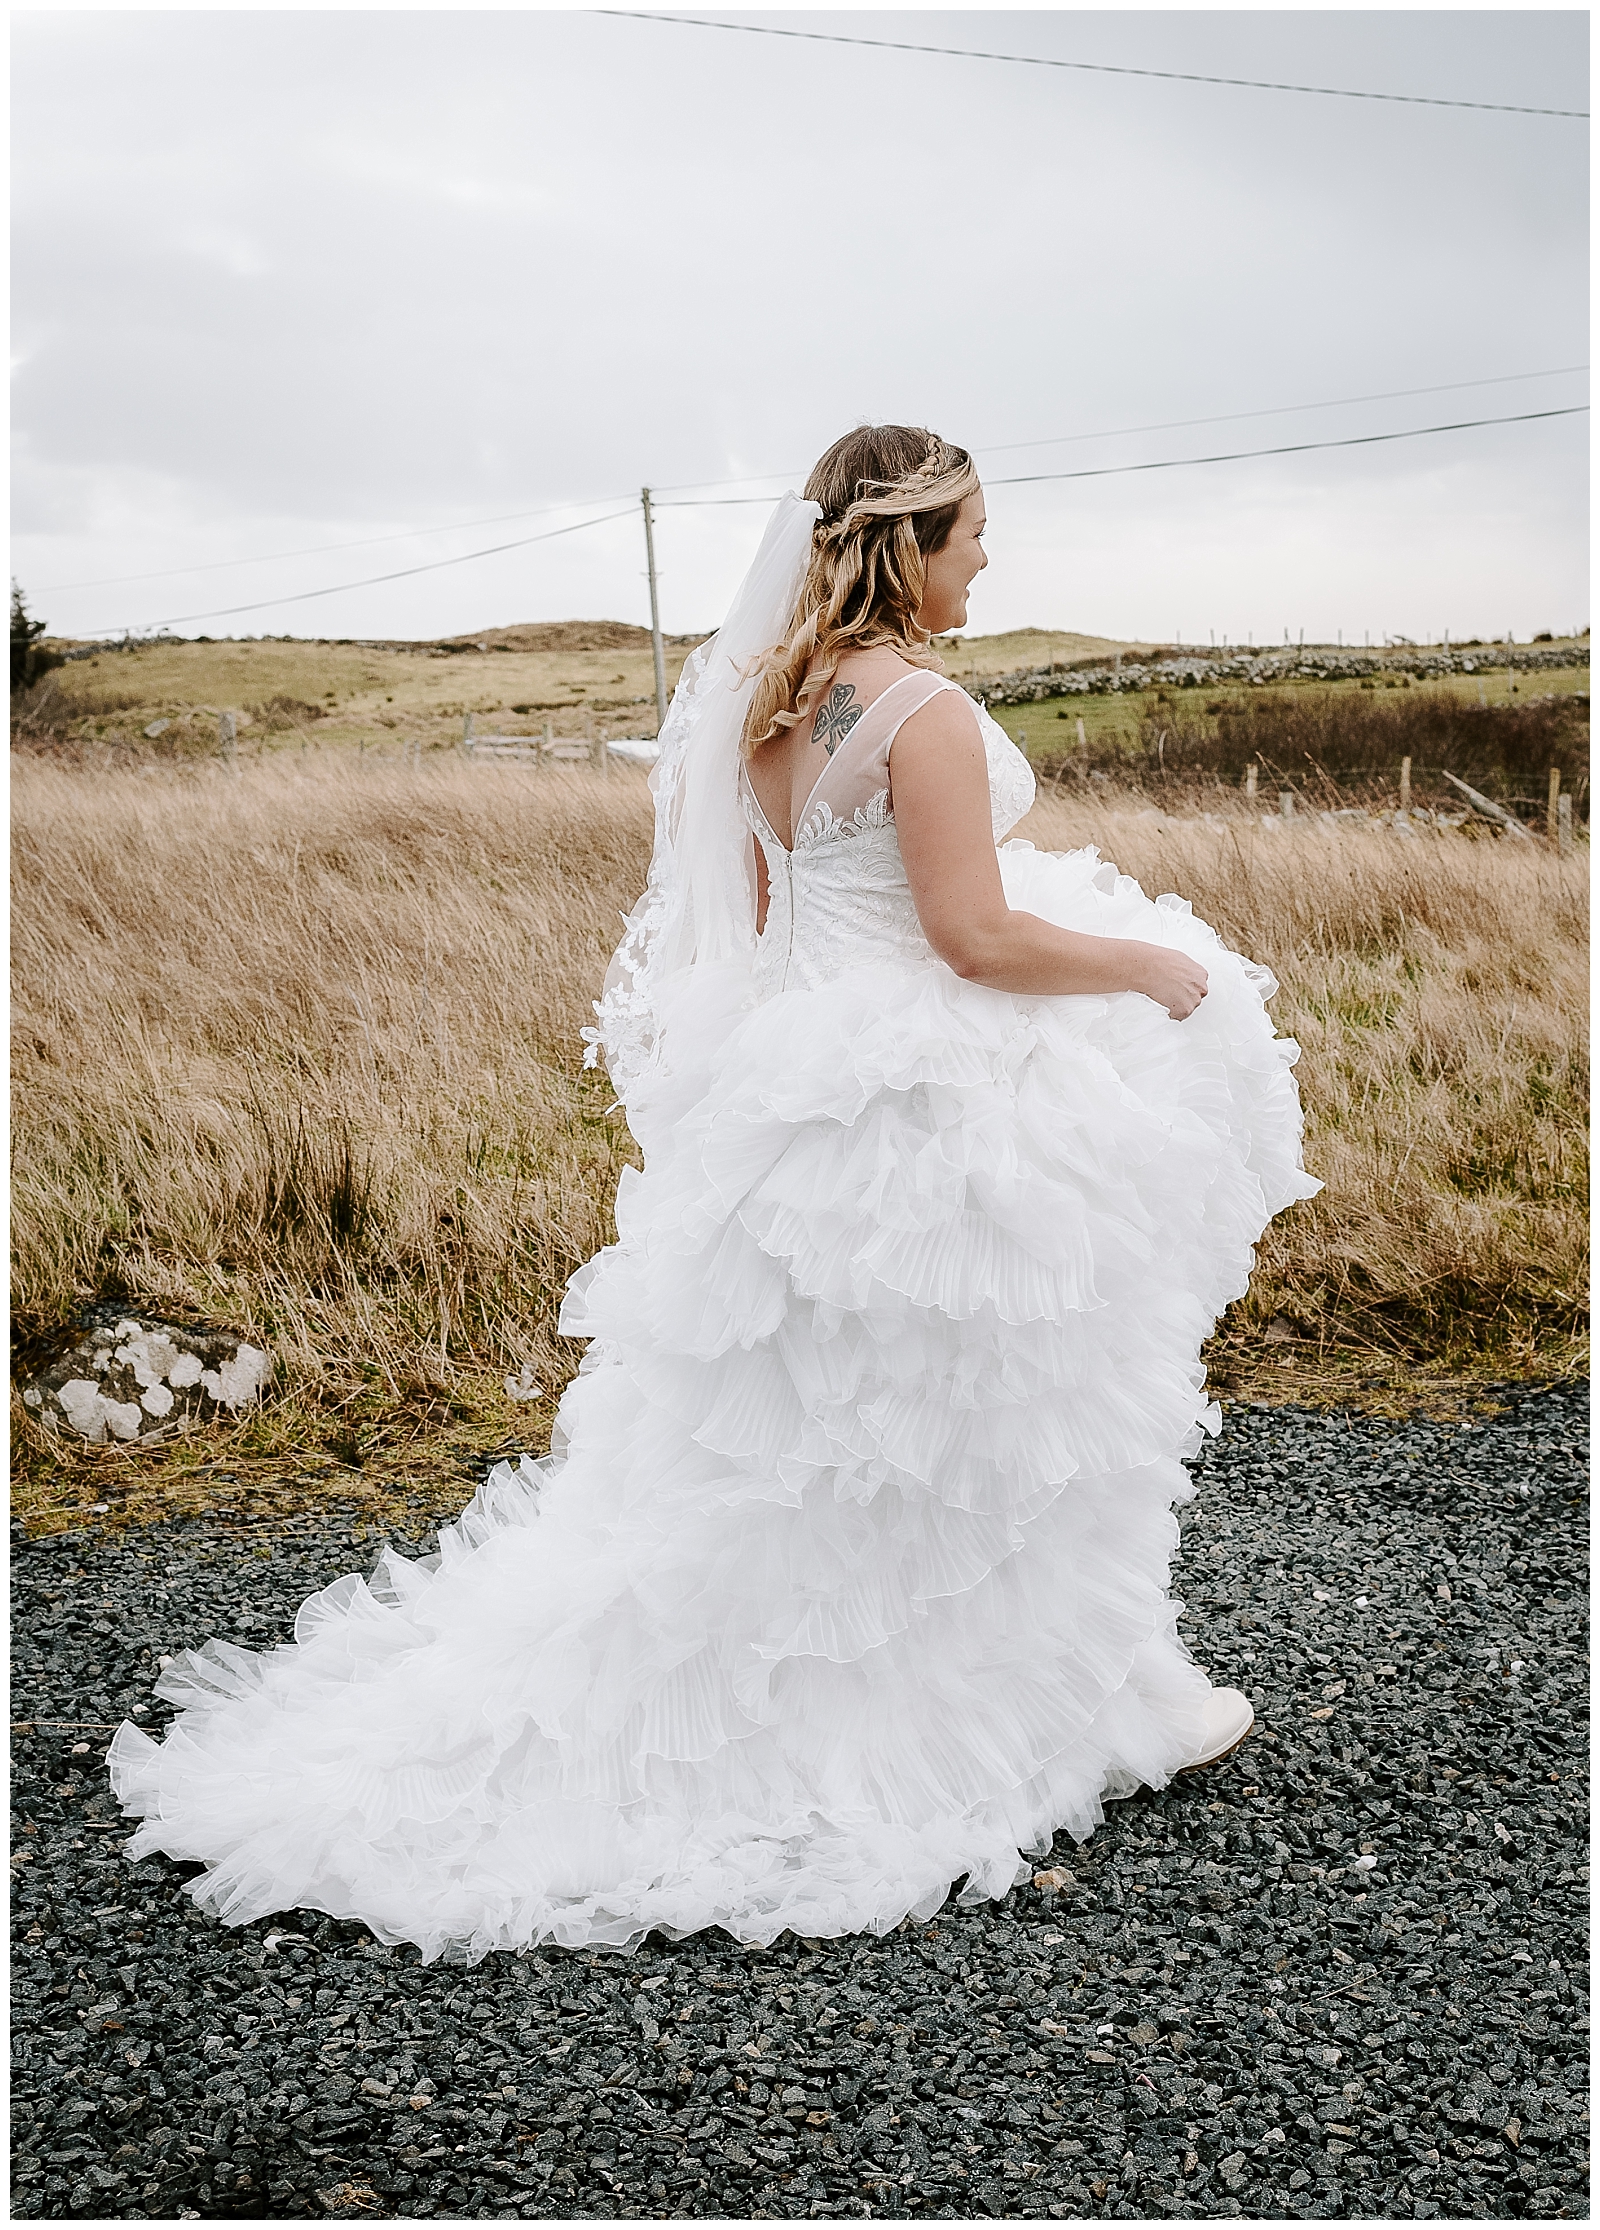 Couple shares a first look as they elope in Ireland.